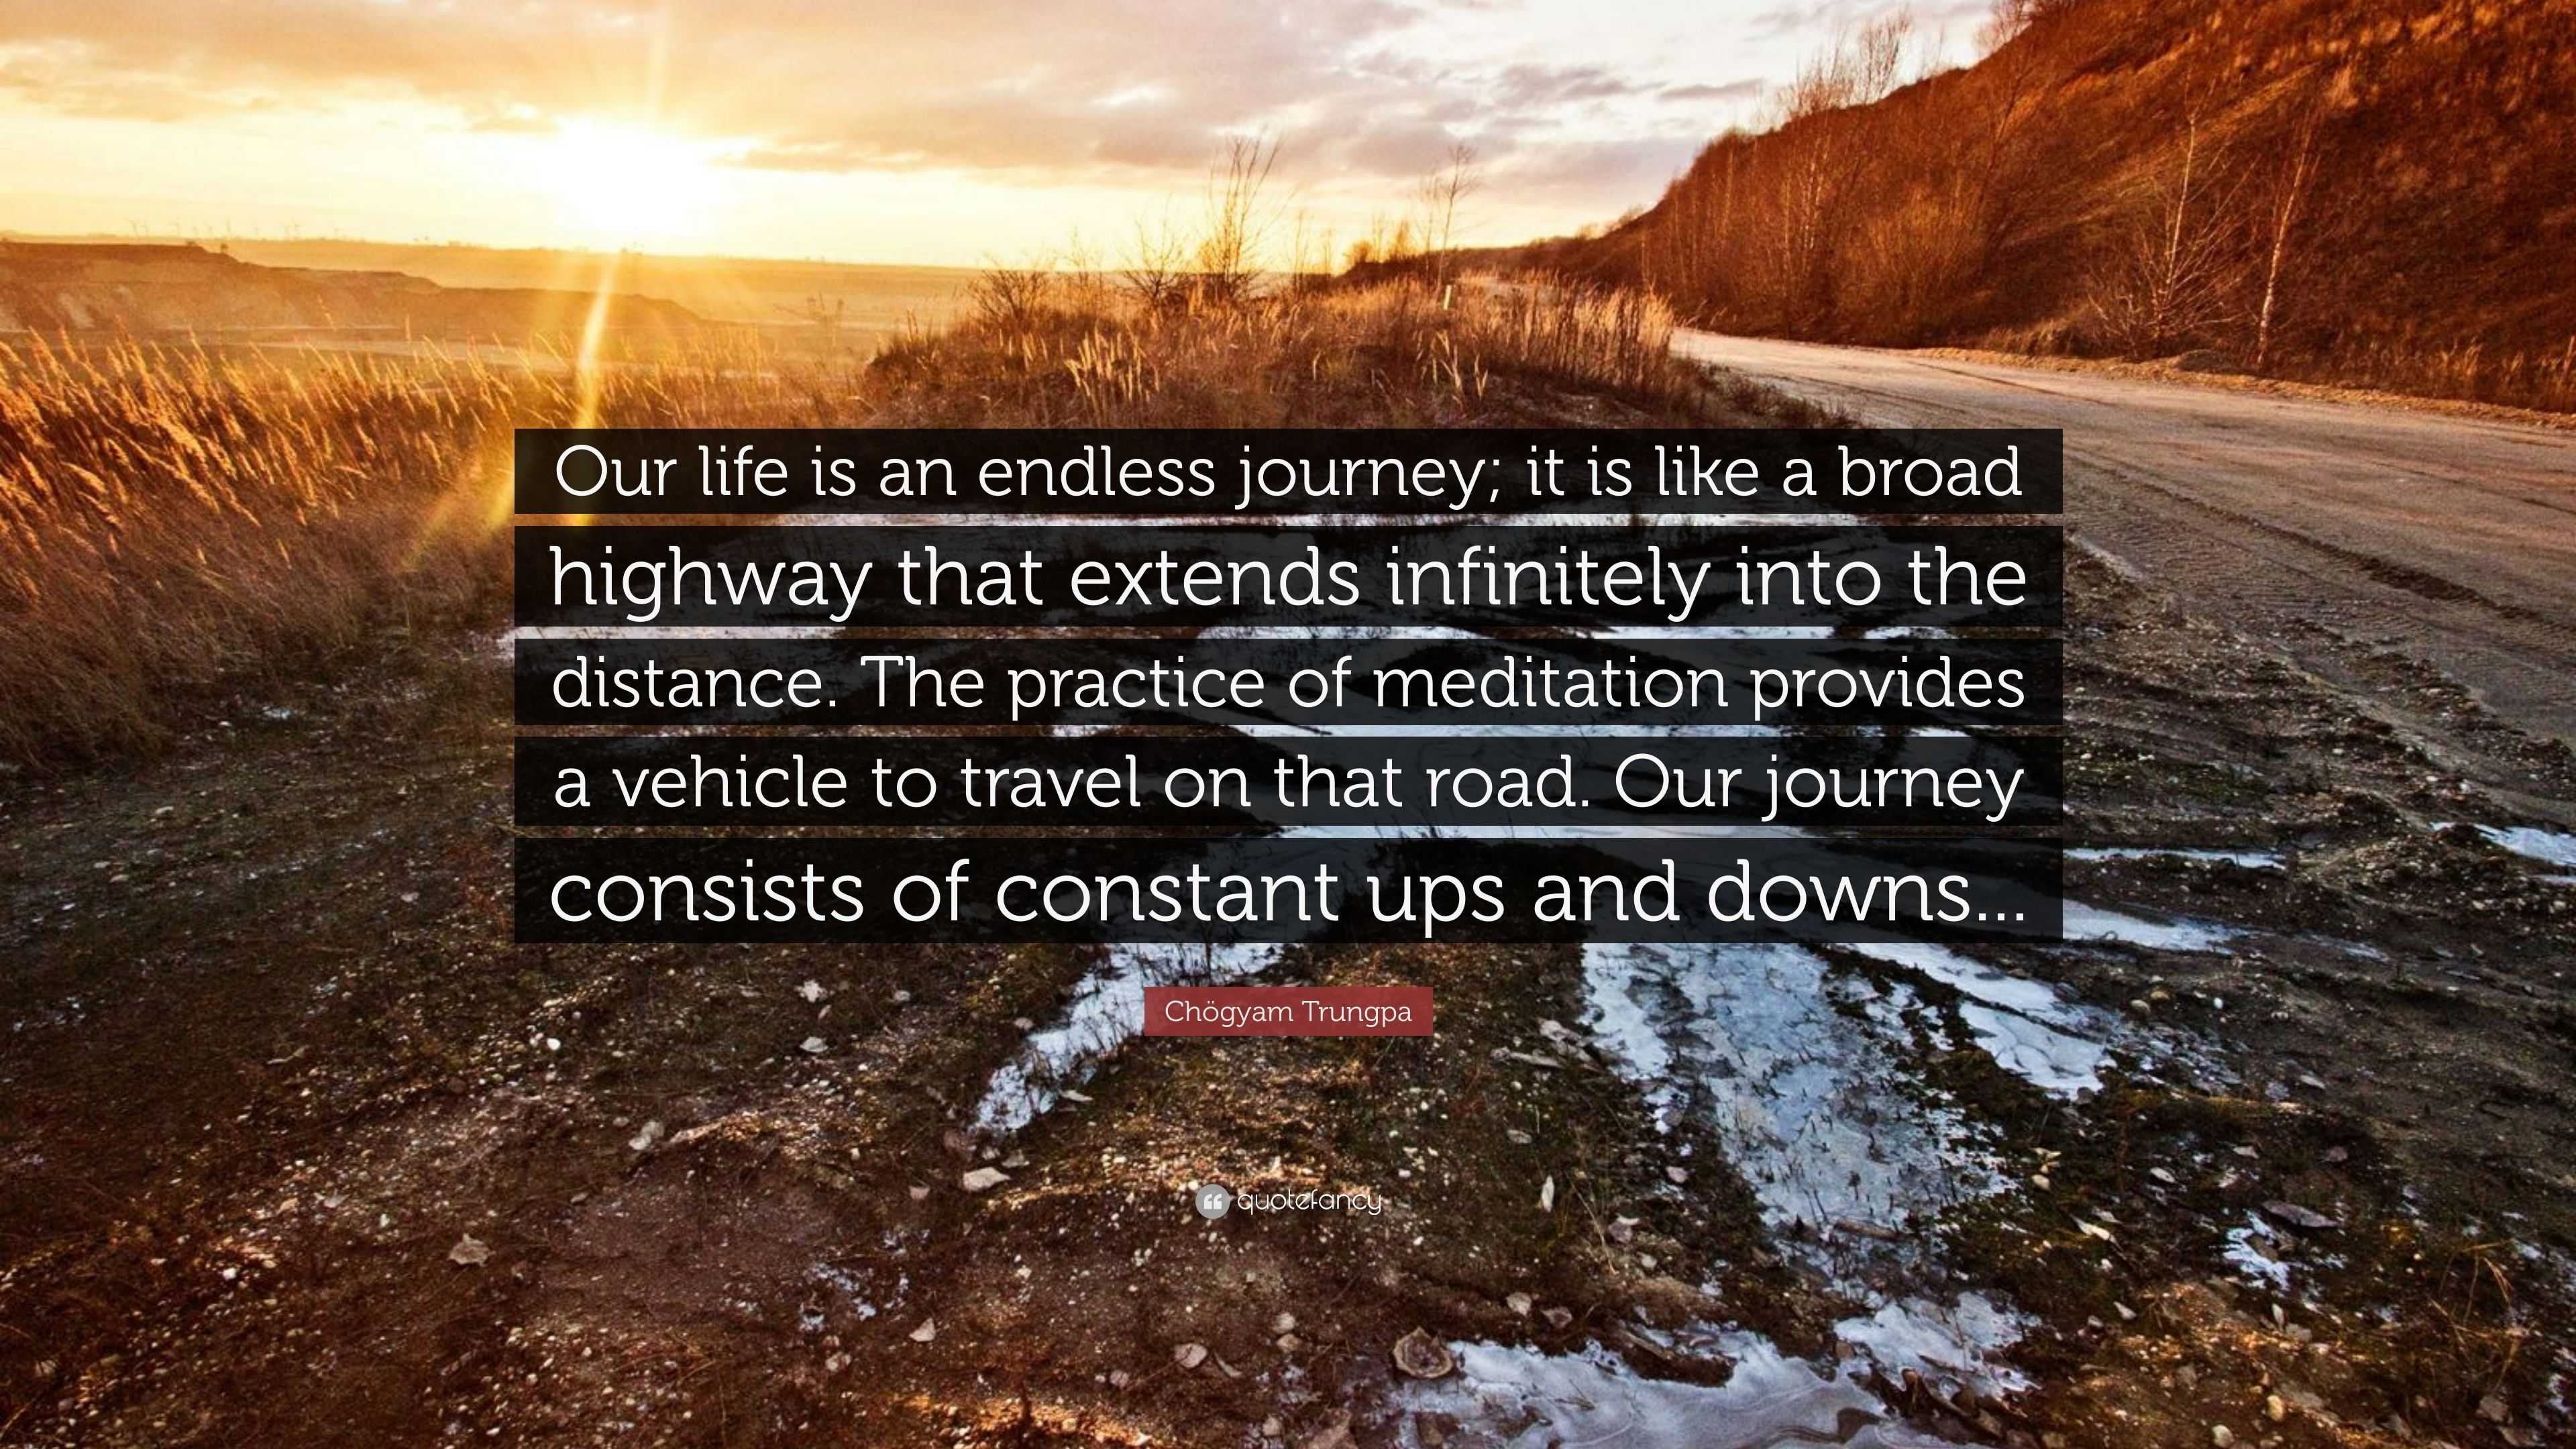 Chögyam Trungpa Quote “Our life is an endless journey it is like a